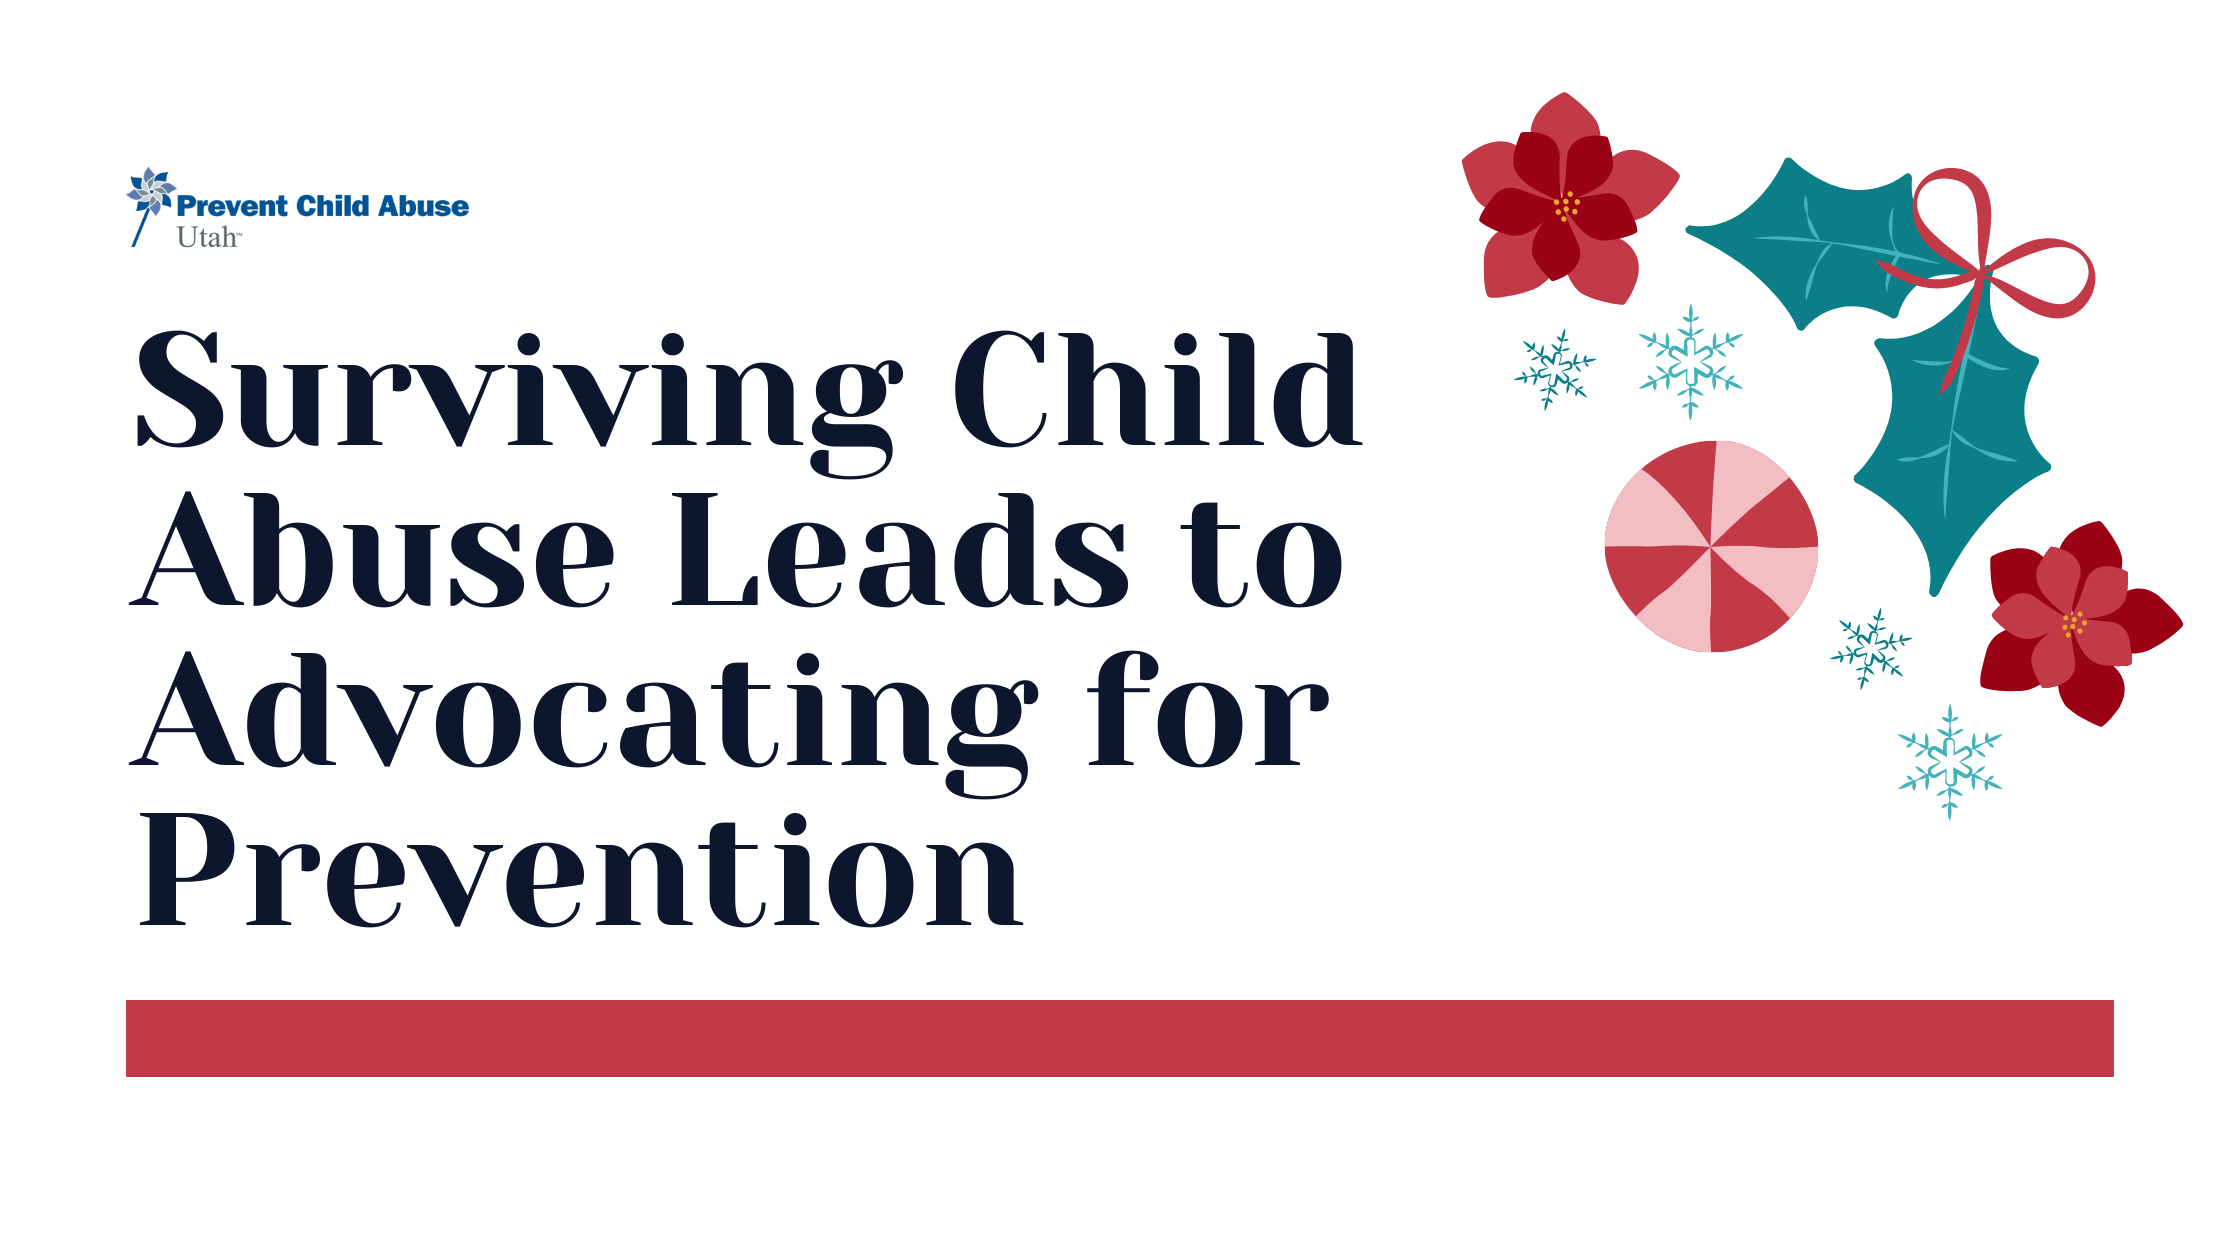 Featured image for “Surviving Child Abuse Leads to Advocating for Prevention”